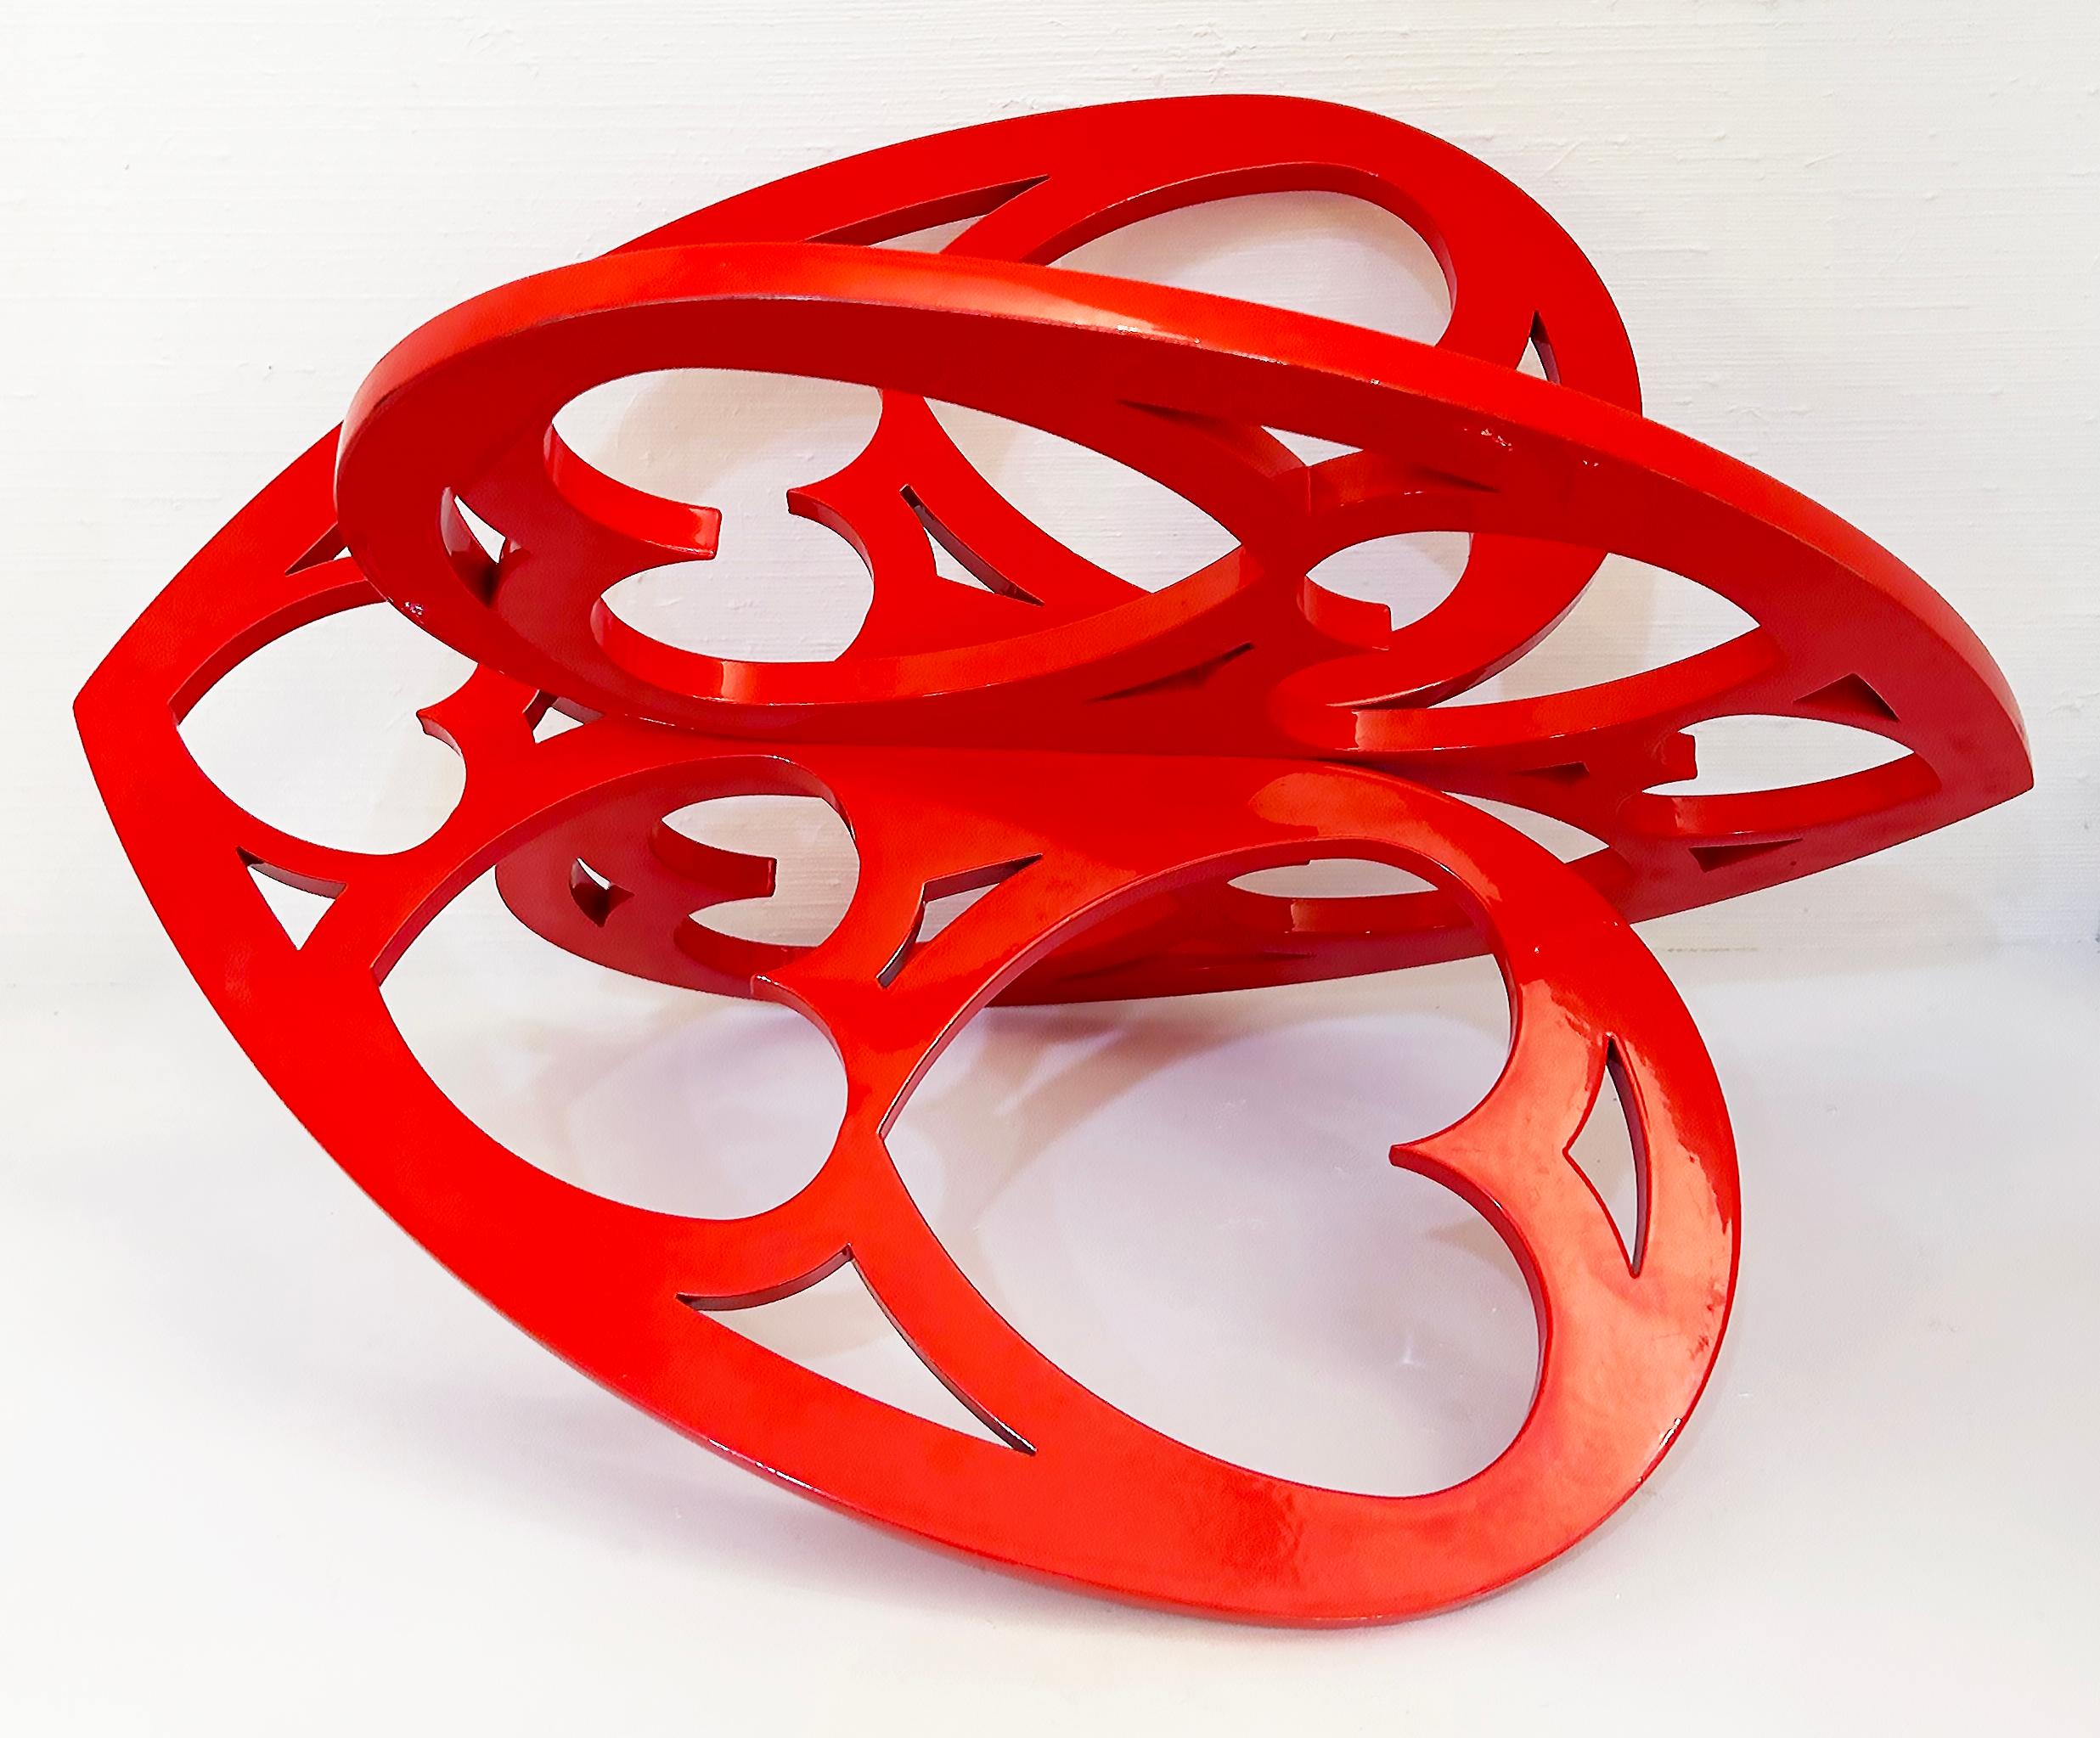 Interlocking Hearts Powder-coated Aluminum Lace Sculpture by Michael Gitter

Offered for sale is an interlocking hearts powder-coated aluminum 